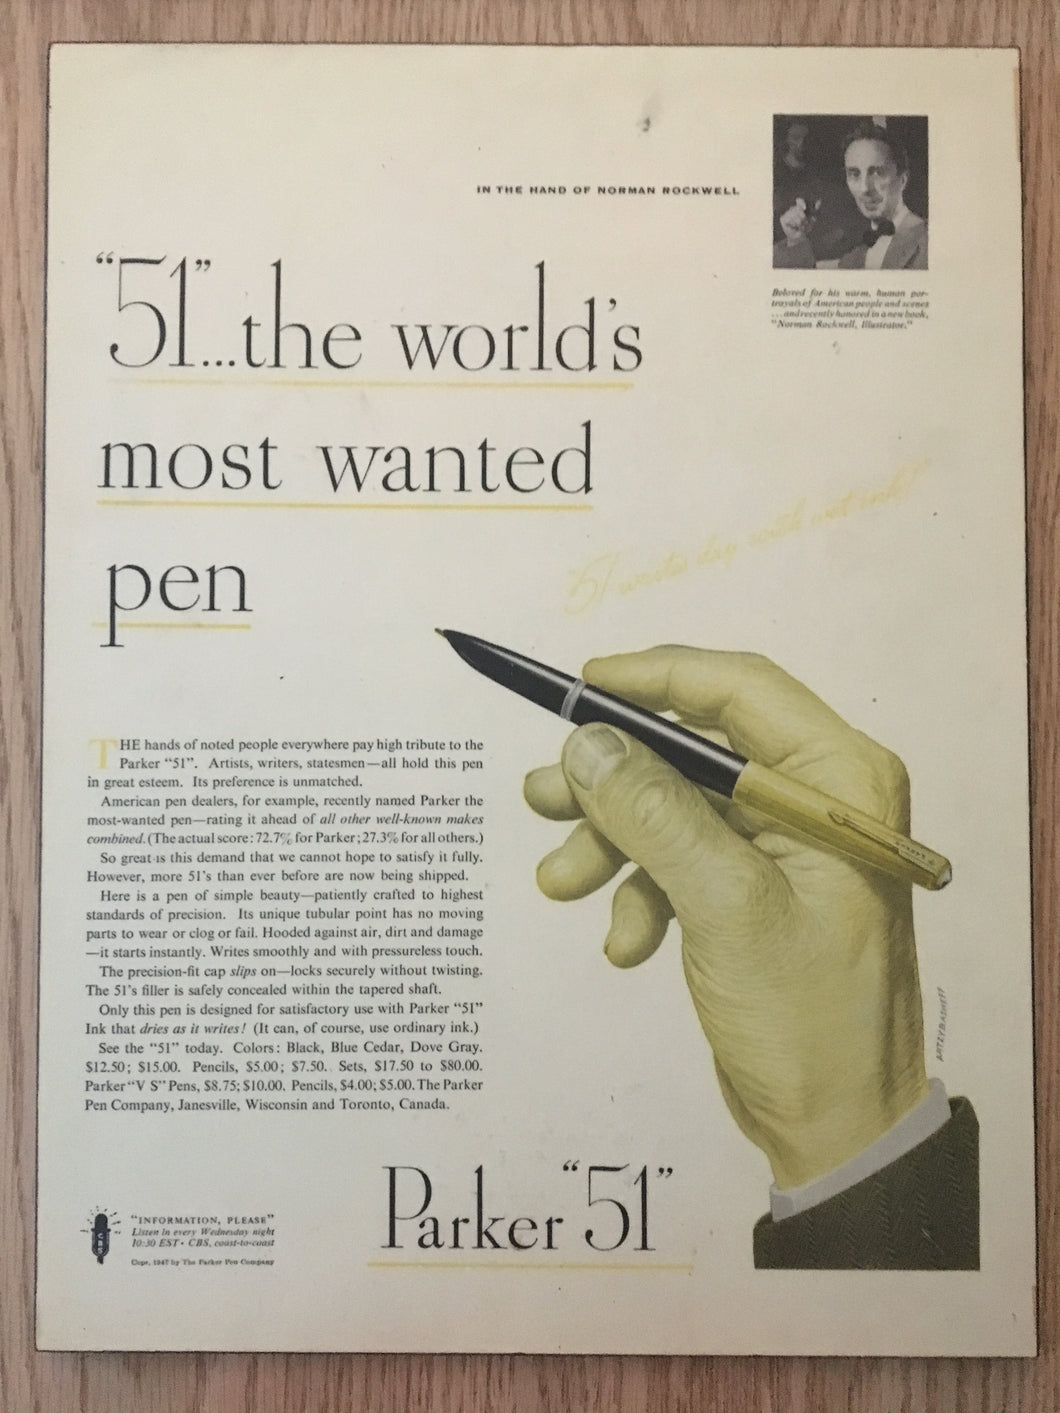 Vintage Ads. Mounted: Parker 51, the world's most wanted pen